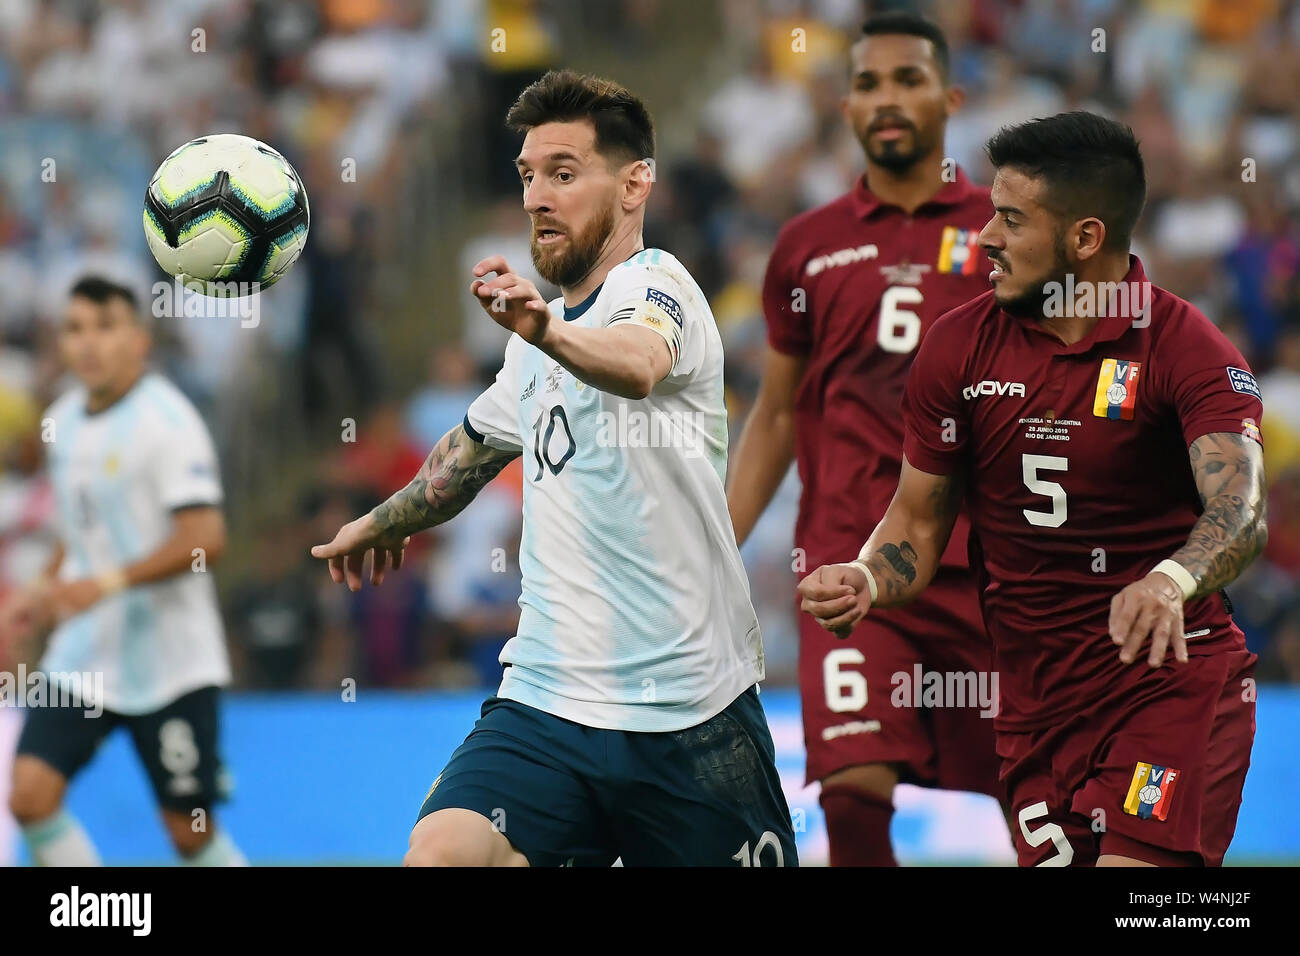 Soccer player Lionel Messi of Argentina, during the Venezuela vs Argentina match for the Copa America 2019 at the Maracanã stadium. Stock Photo